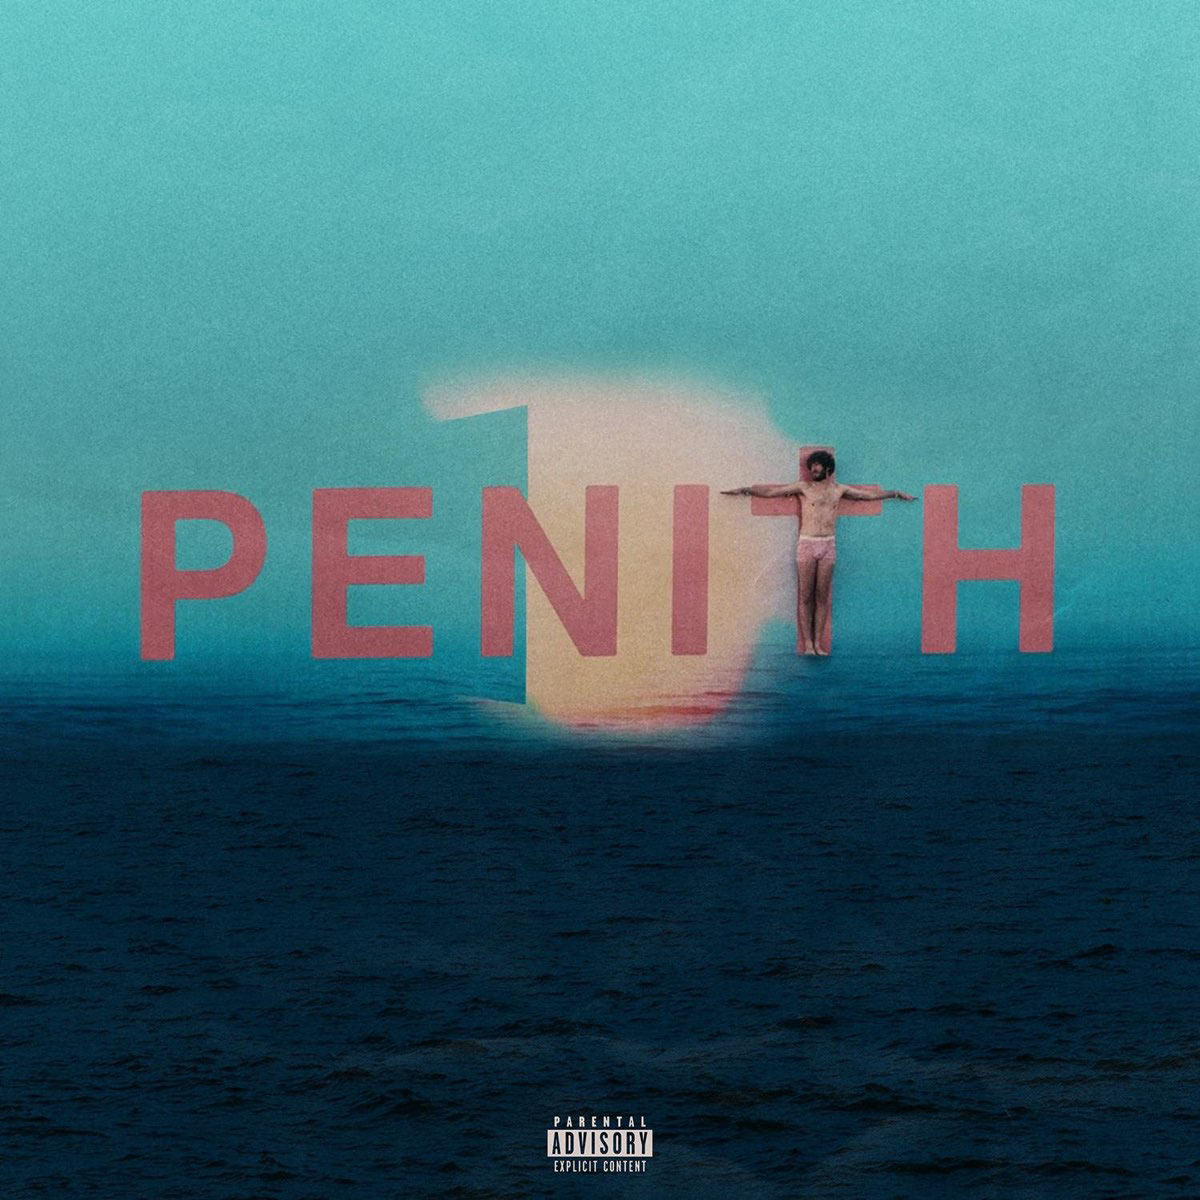 Official artwork for the Penith album by Lil Dicky